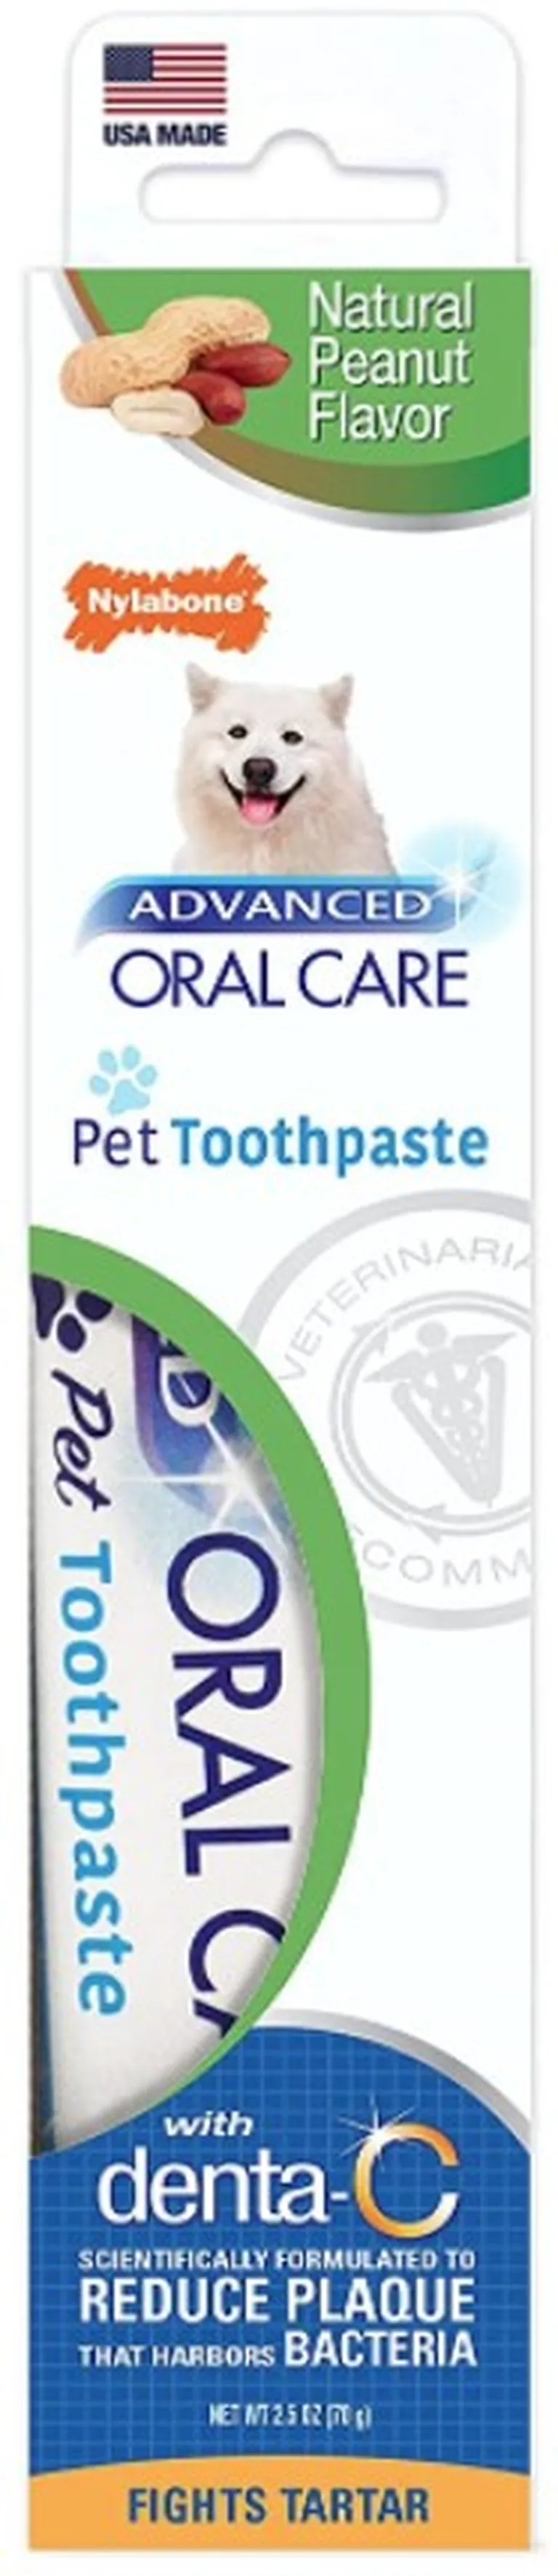 Nylabone Advanced Oral Care Natural Peanut Flavor Toothpaste for Dogs Photo 1